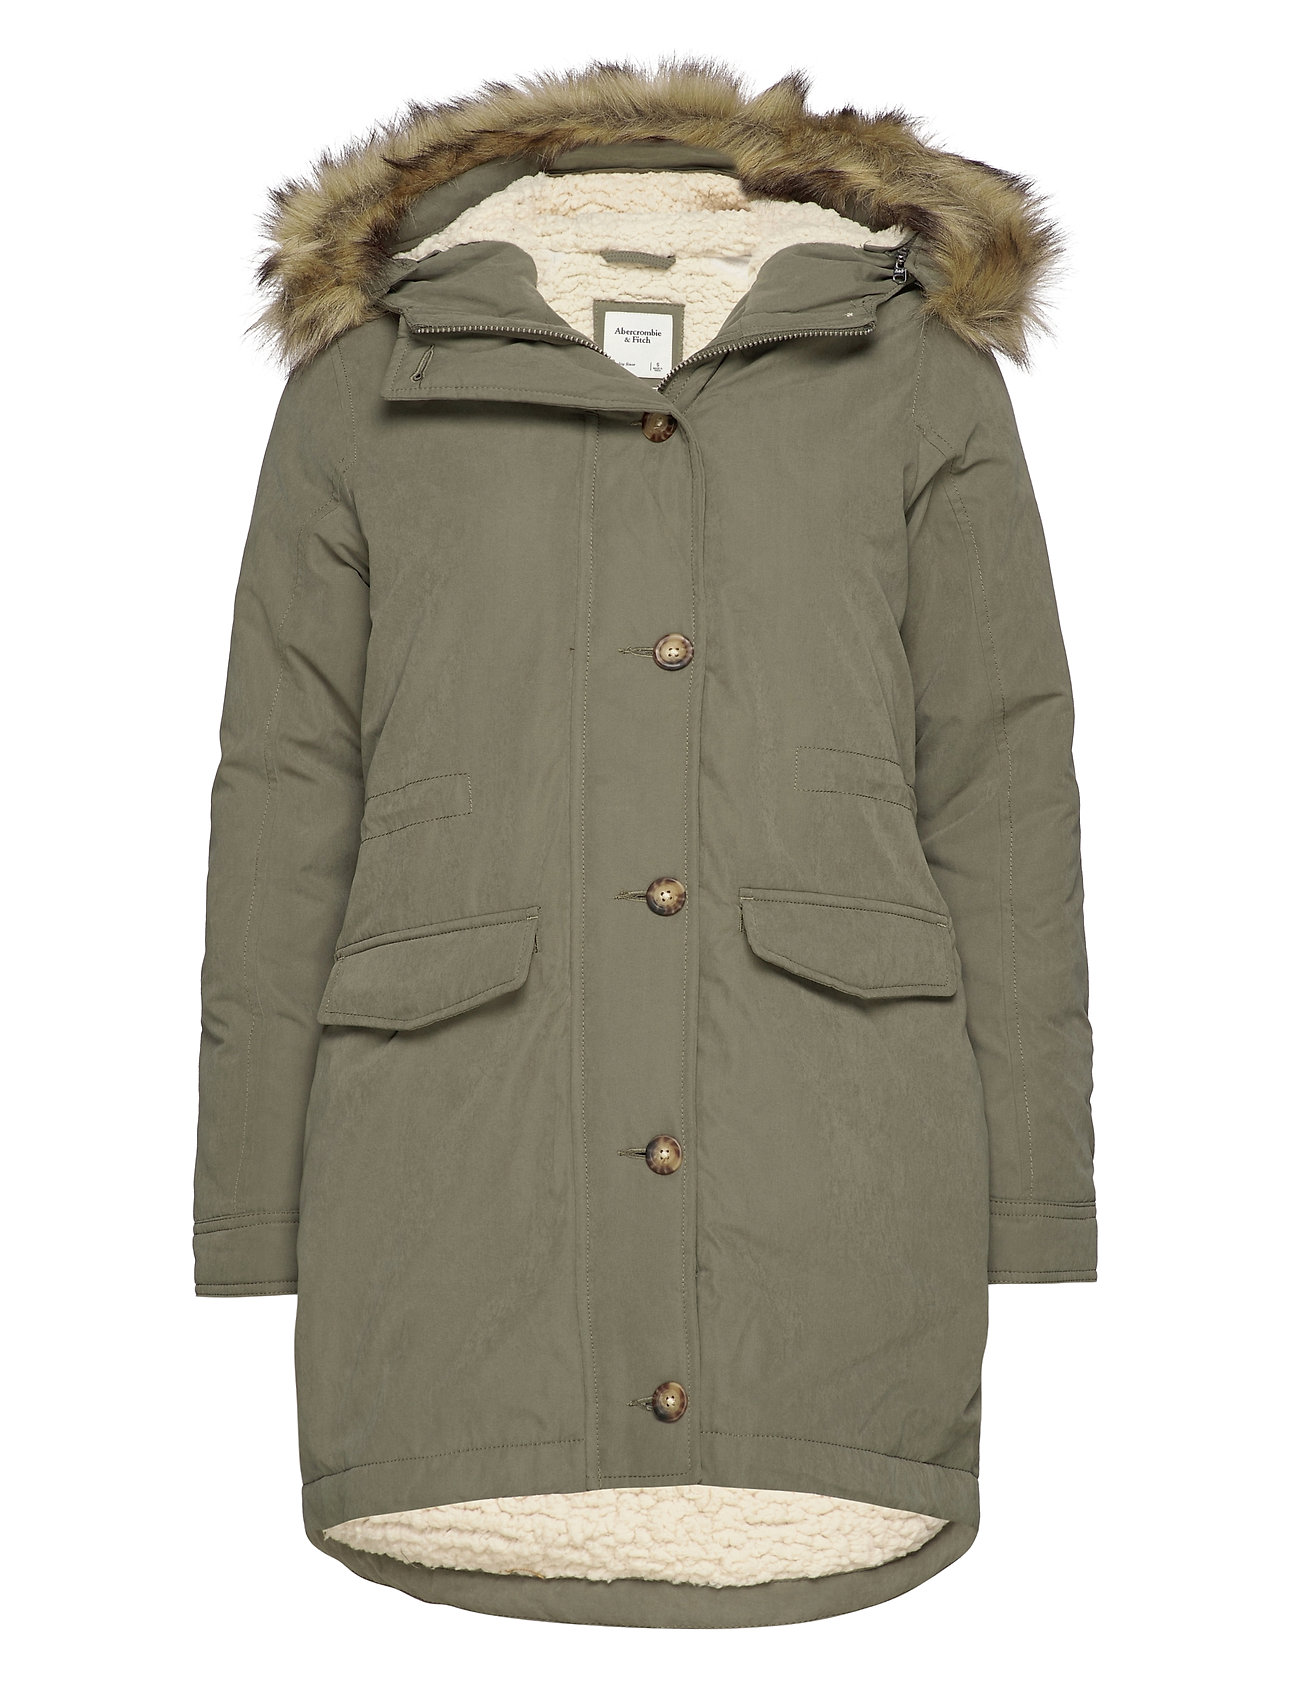 Abercrombie & Fitch parkaer – Anf Womens Outerwear Parkacoat Grøn Abercrombie & Fitch dame i Sort - Pashion.dk